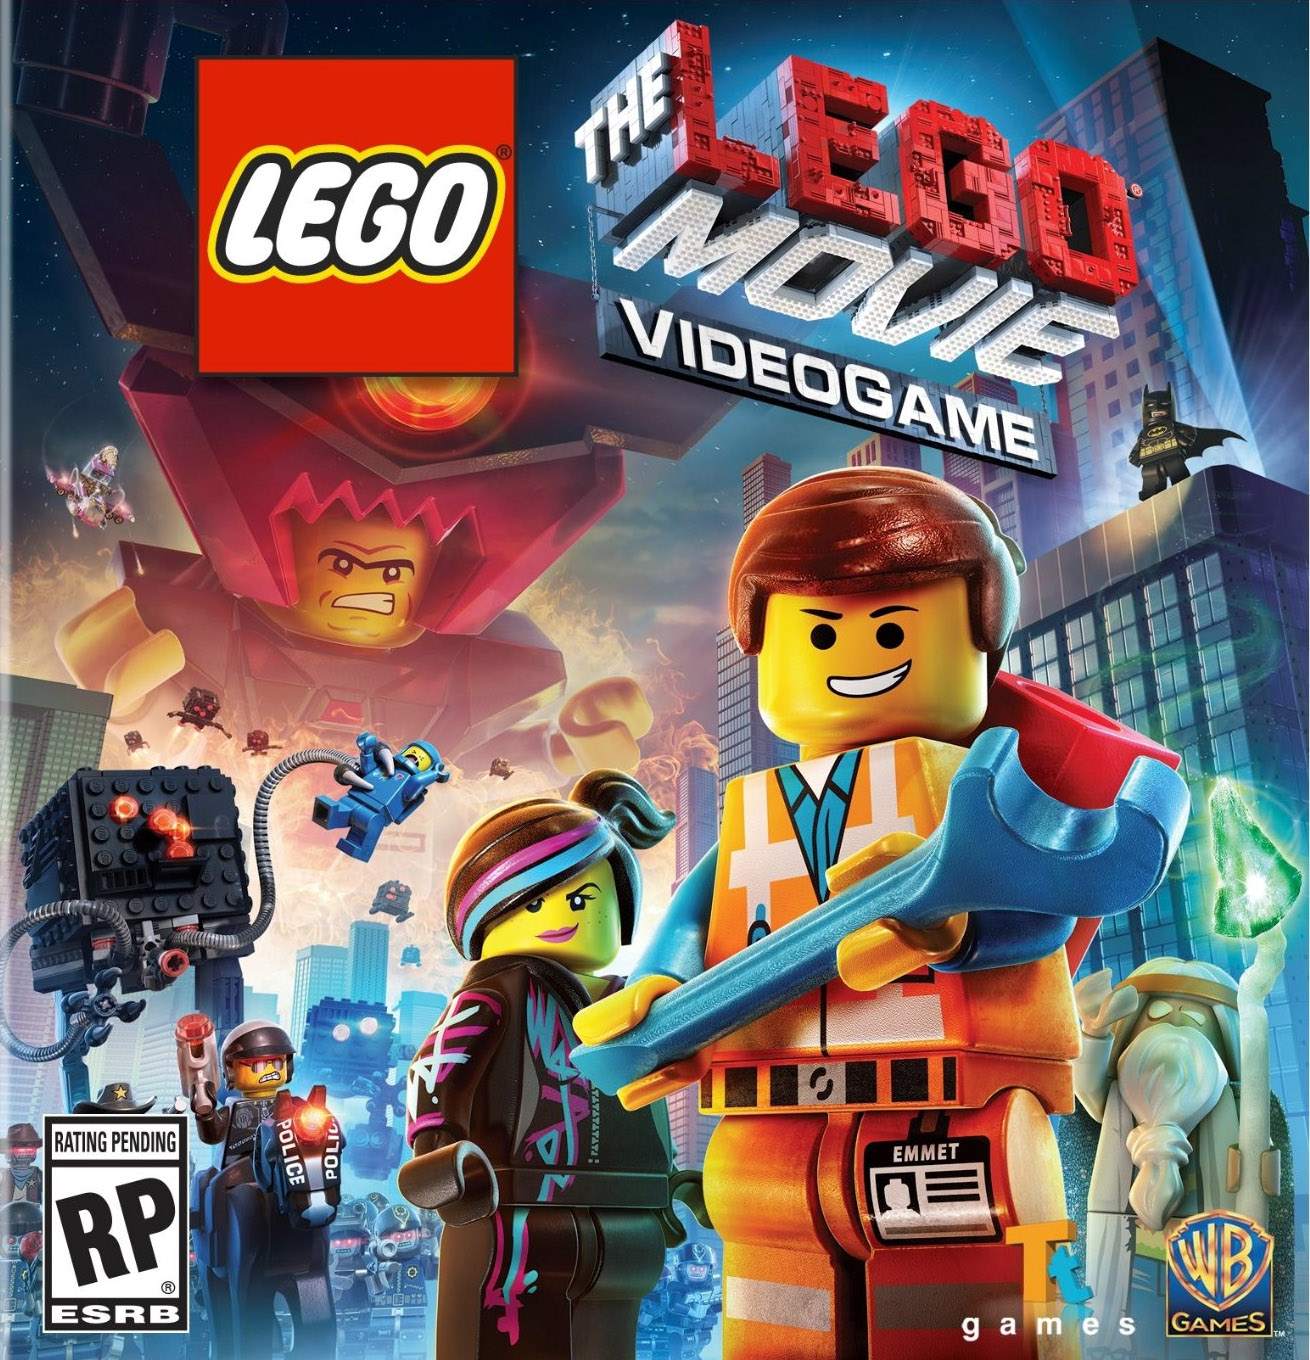 the-lego-movie-western-emmet-minifigure-exclusive-with-video-game